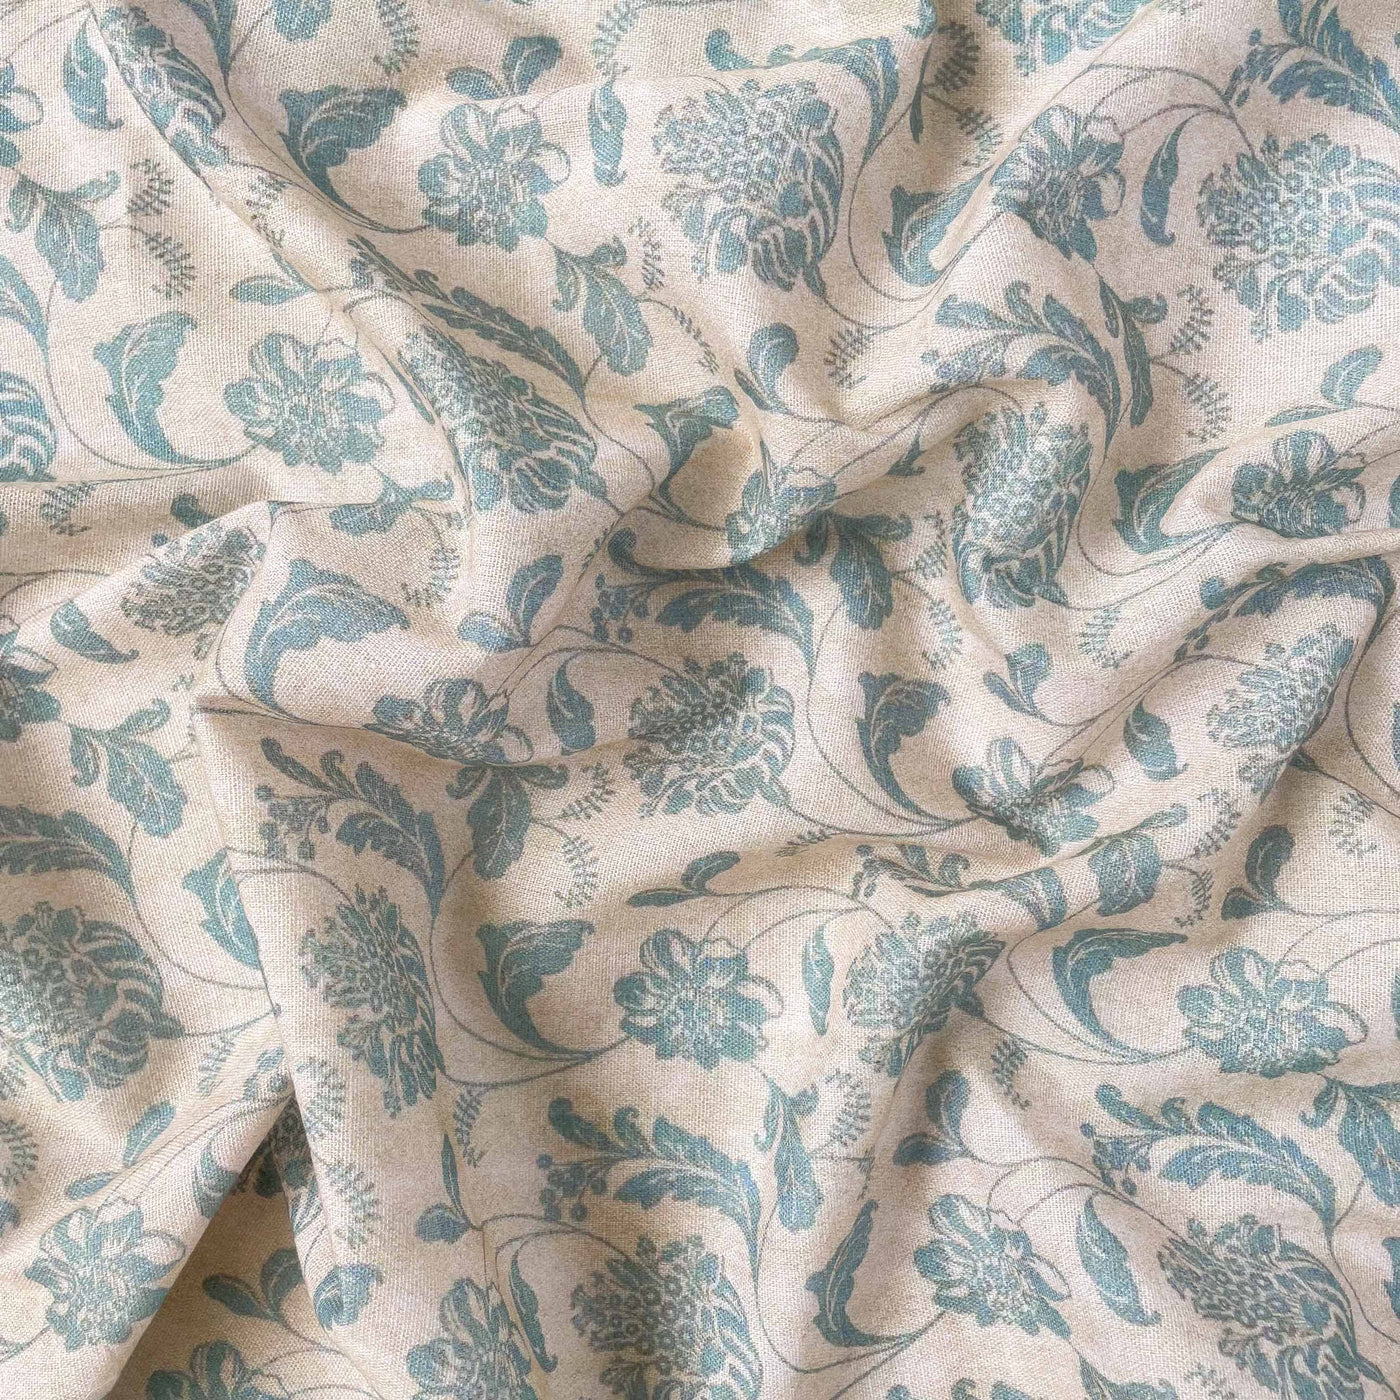 Printed Pure Cotton Linen Fabric Fabric Unisex Dusty Beige & Blue Vintage Blooms Printed Pure Cotton Linen Fabric (Width 44 Inches)